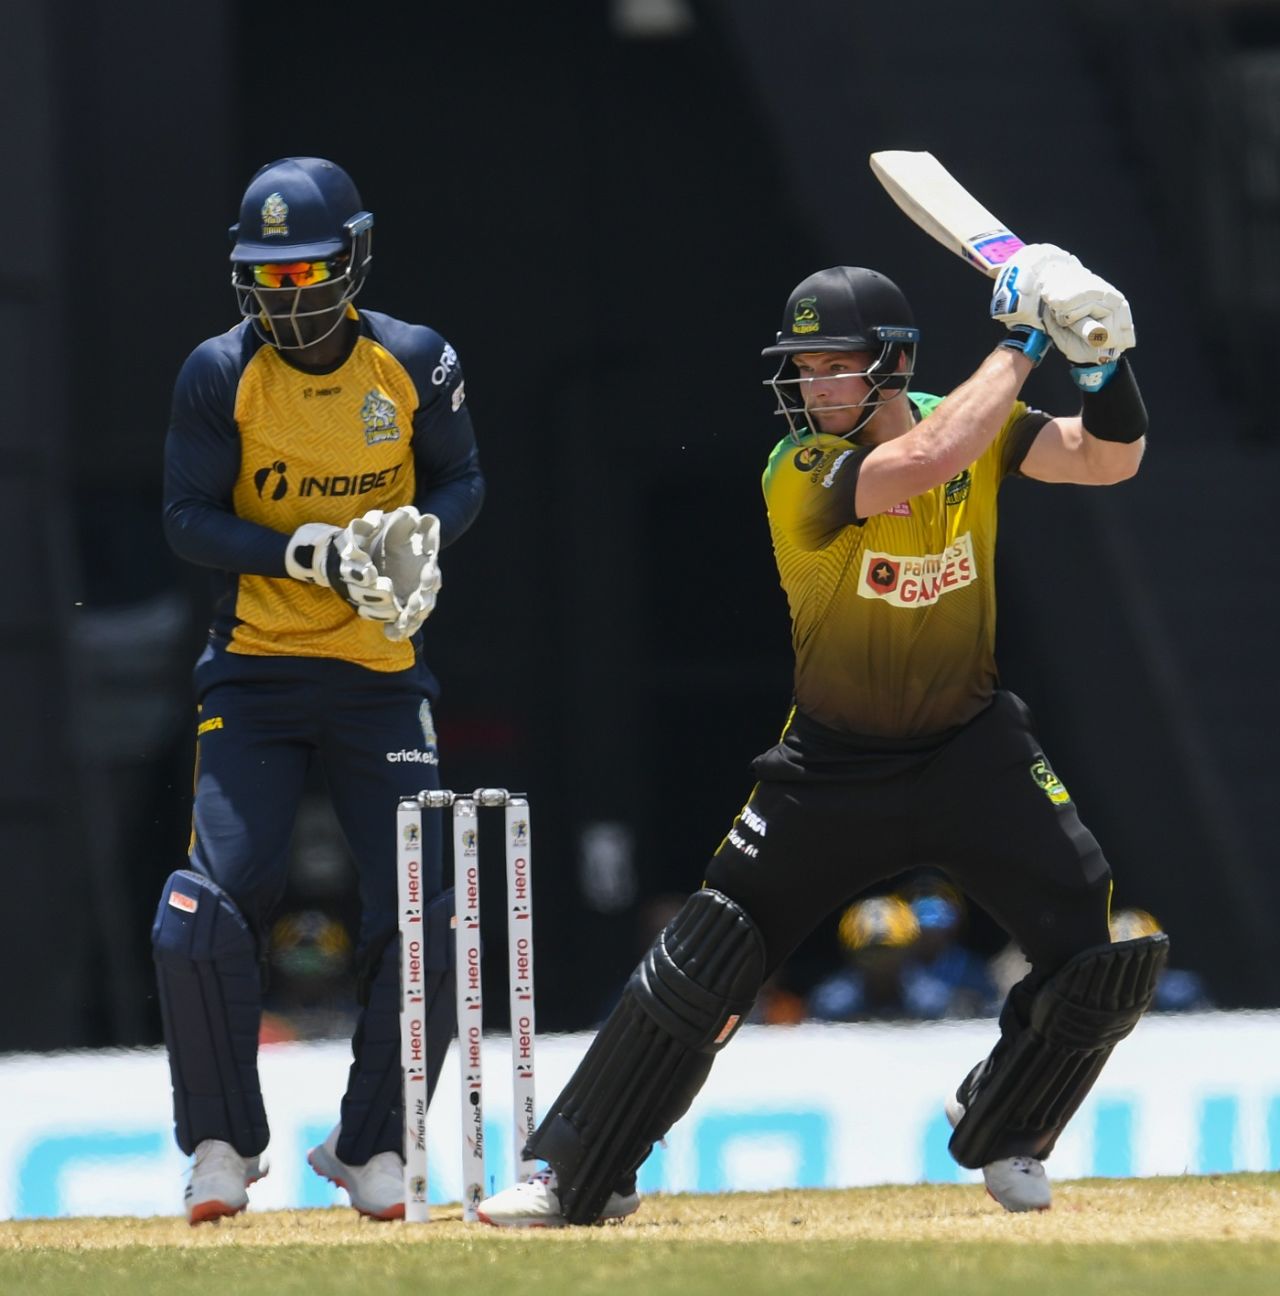 Glenn Phillips hits a boundary on his way to 44 against St Lucia Zouks, Jamaica Tallawahs v St Lucia Zouks, Trinidad, CPL 2020, August 19, 2020